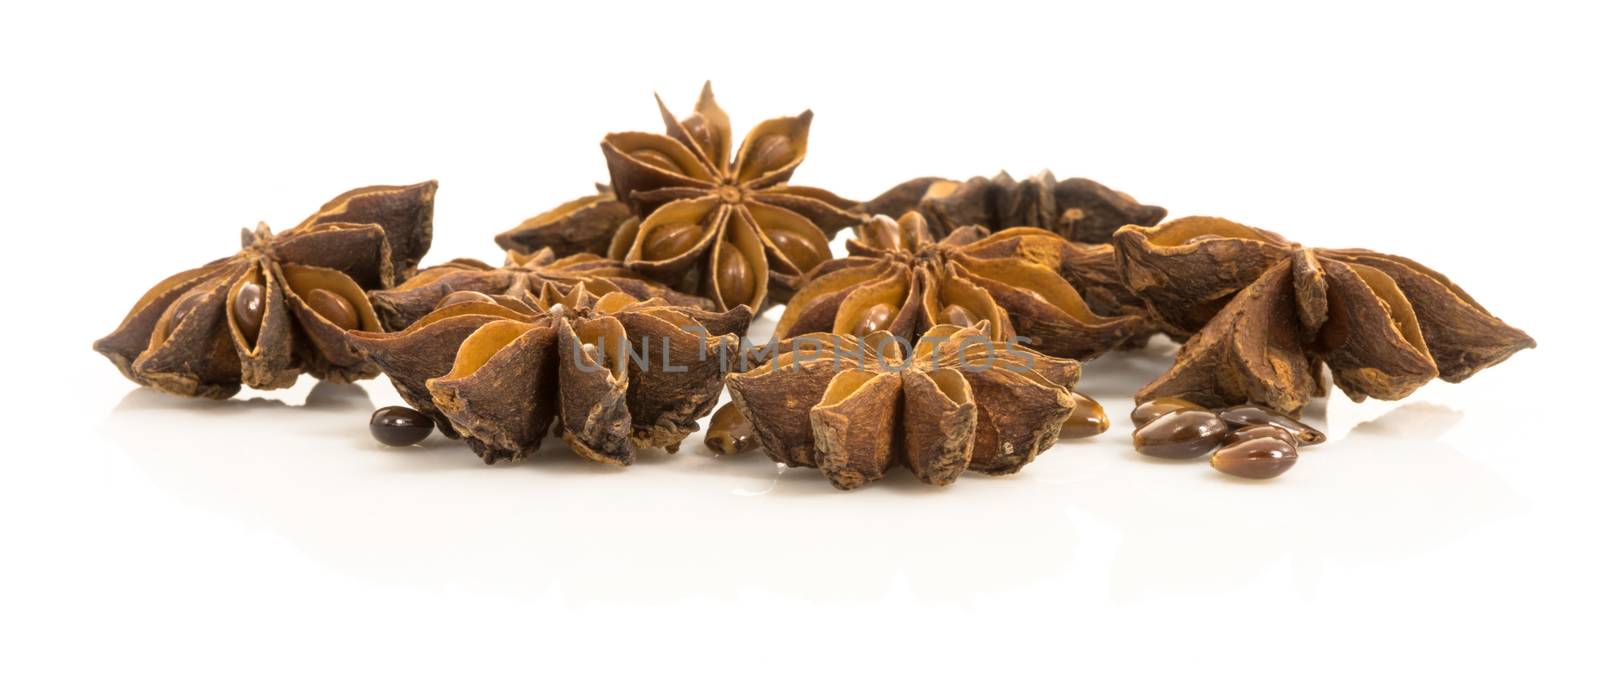 star anise. Seeds of herbaceous annual plant of the family Umbelliferae